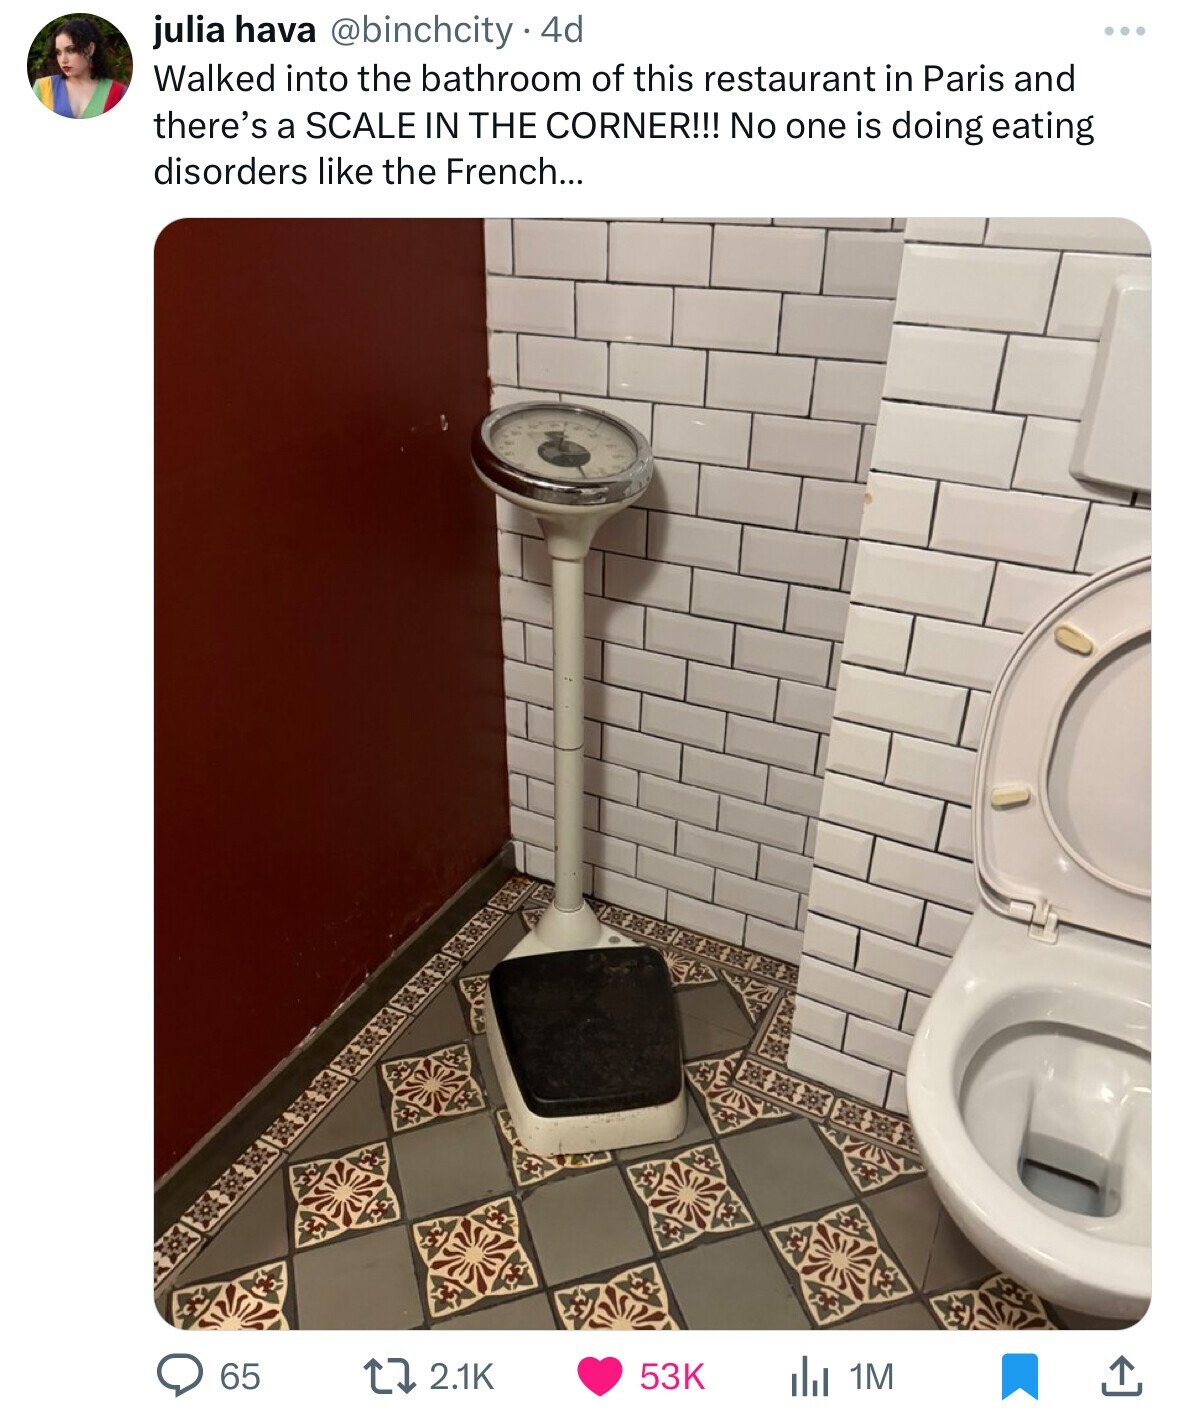 tile - julia hava 4d Walked into the bathroom of this restaurant in Paris and there's a Scale In The Corner!!! No one is doing eating disorders the French... Y 65 t7 53K ili 1M